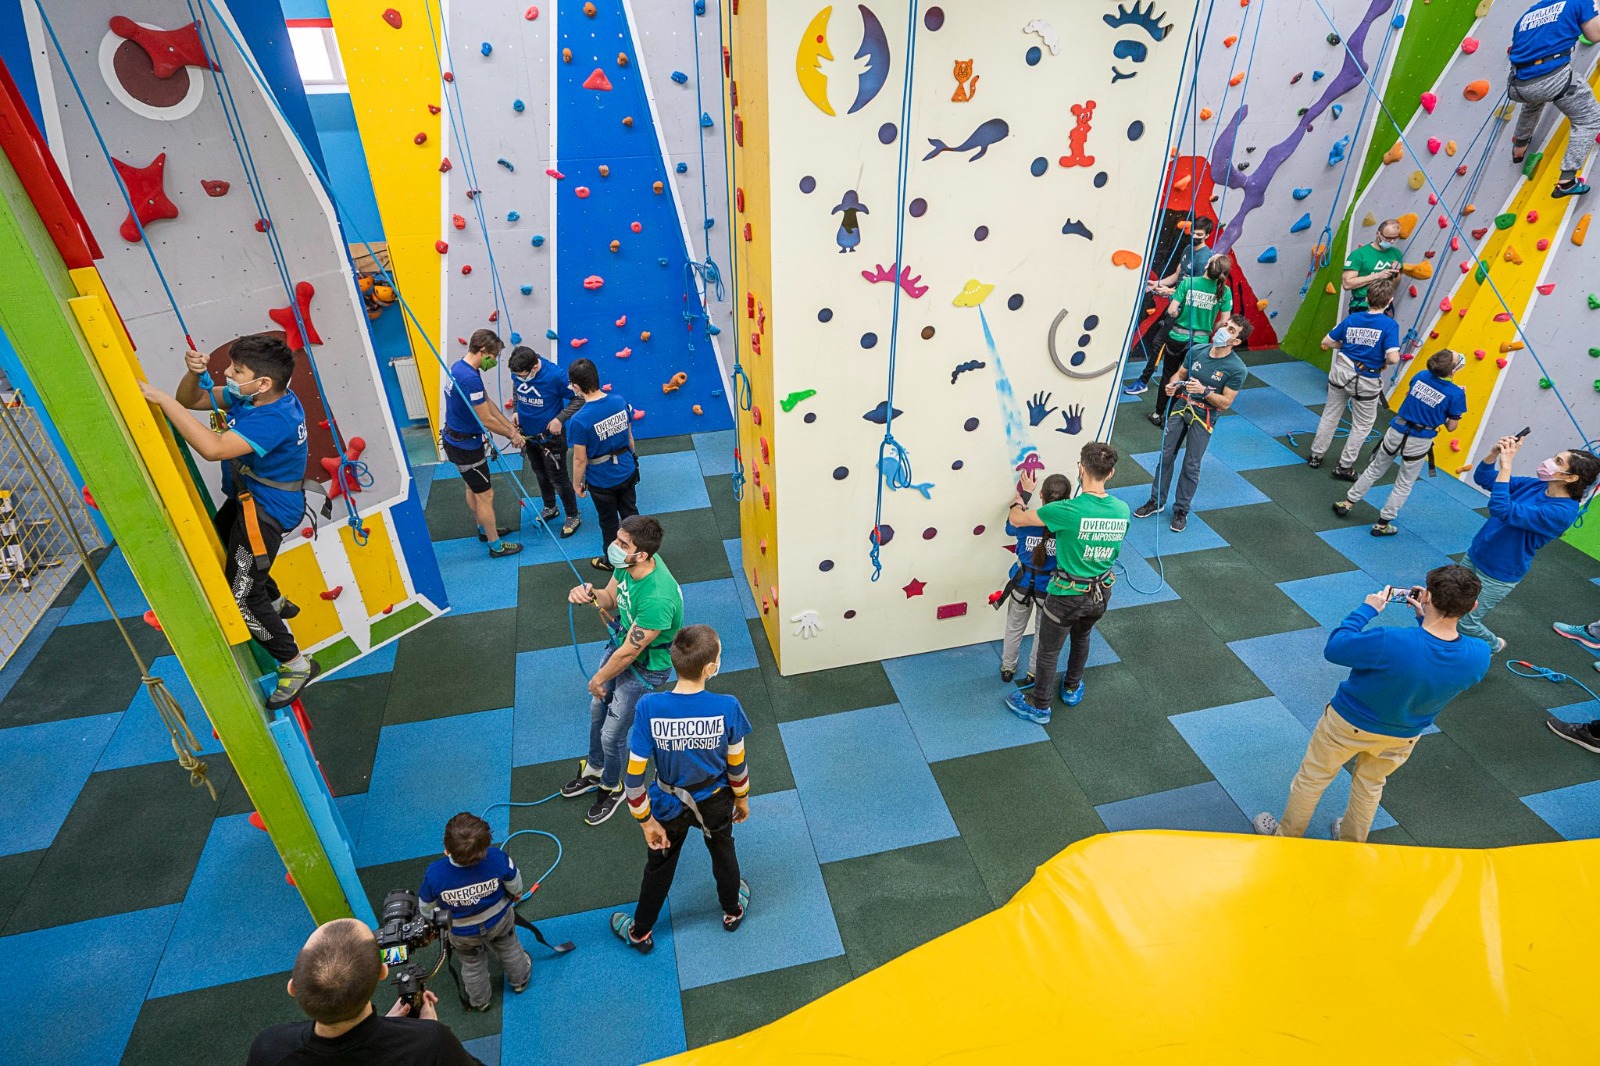 Read more about the article Baupartner supports children with disabilities at Climb Again Climbing Center